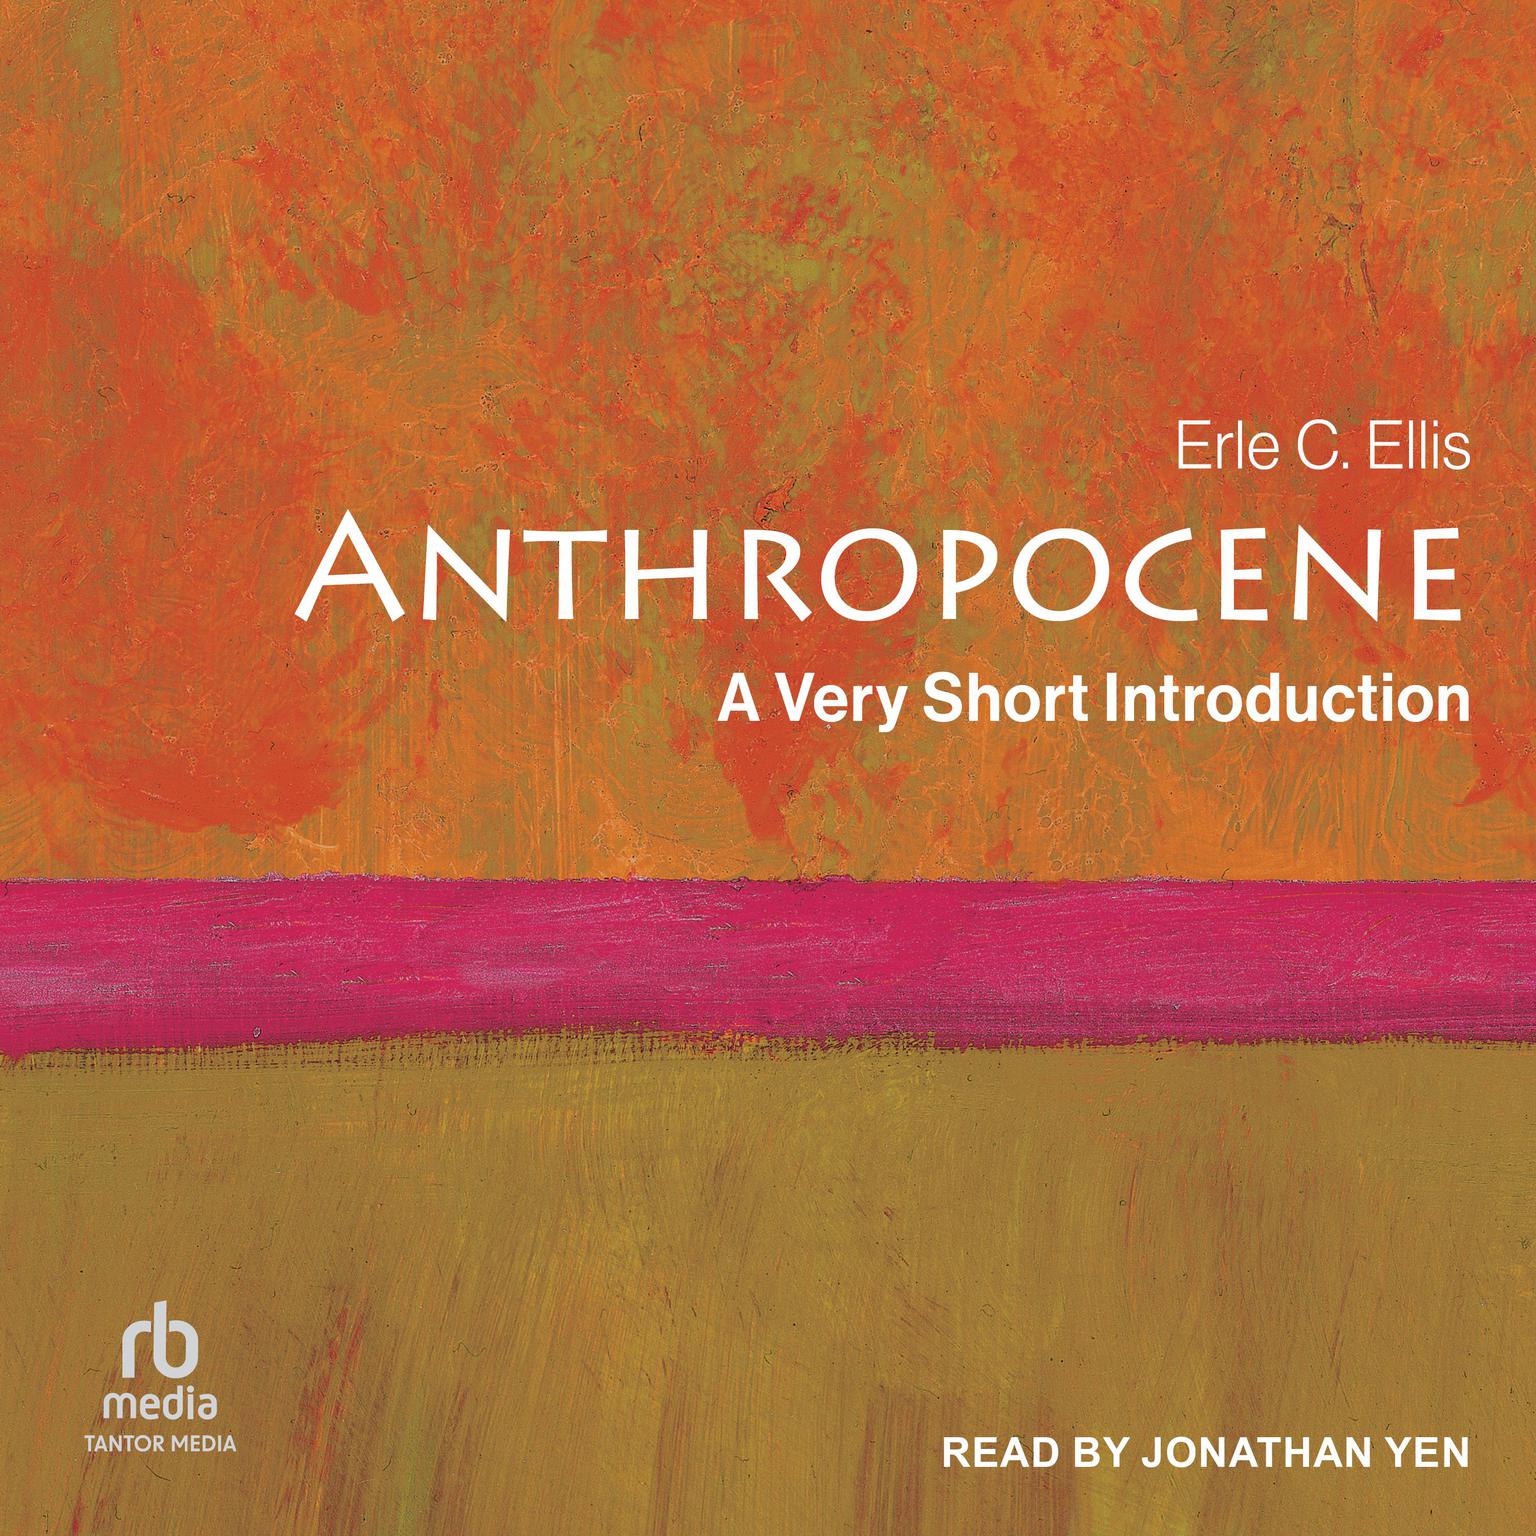 Anthropocene: A Very Short Introduction Audiobook, by Erle C. Ellis